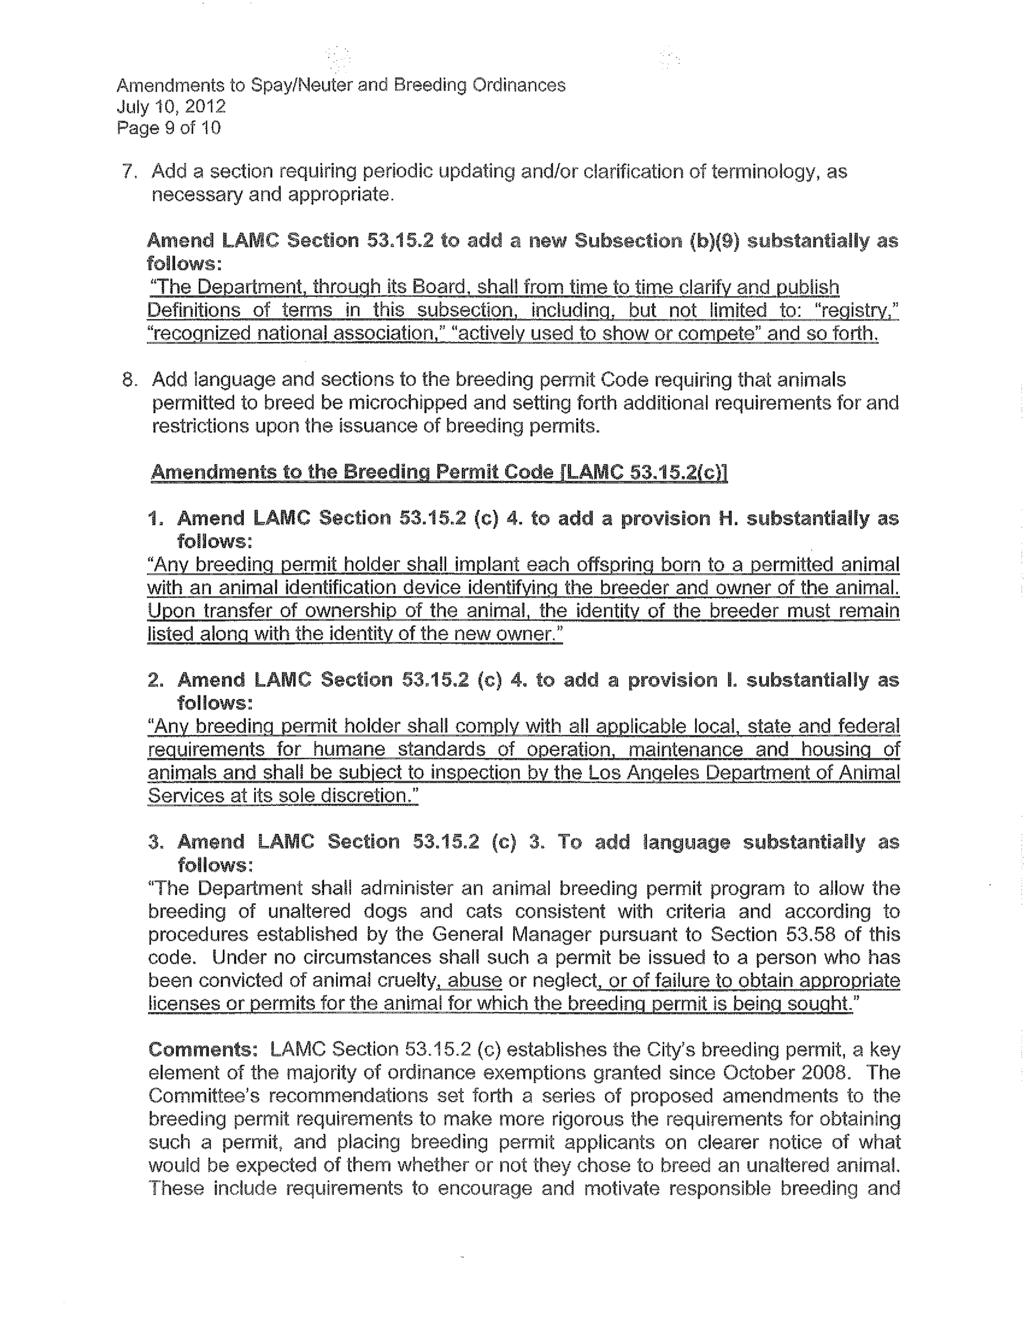 Page 9 of 10 7. Add a section requiring periodic updating and/or clarification of terminology, as necessary and appropriate. Amend LAMC Section 53.15.